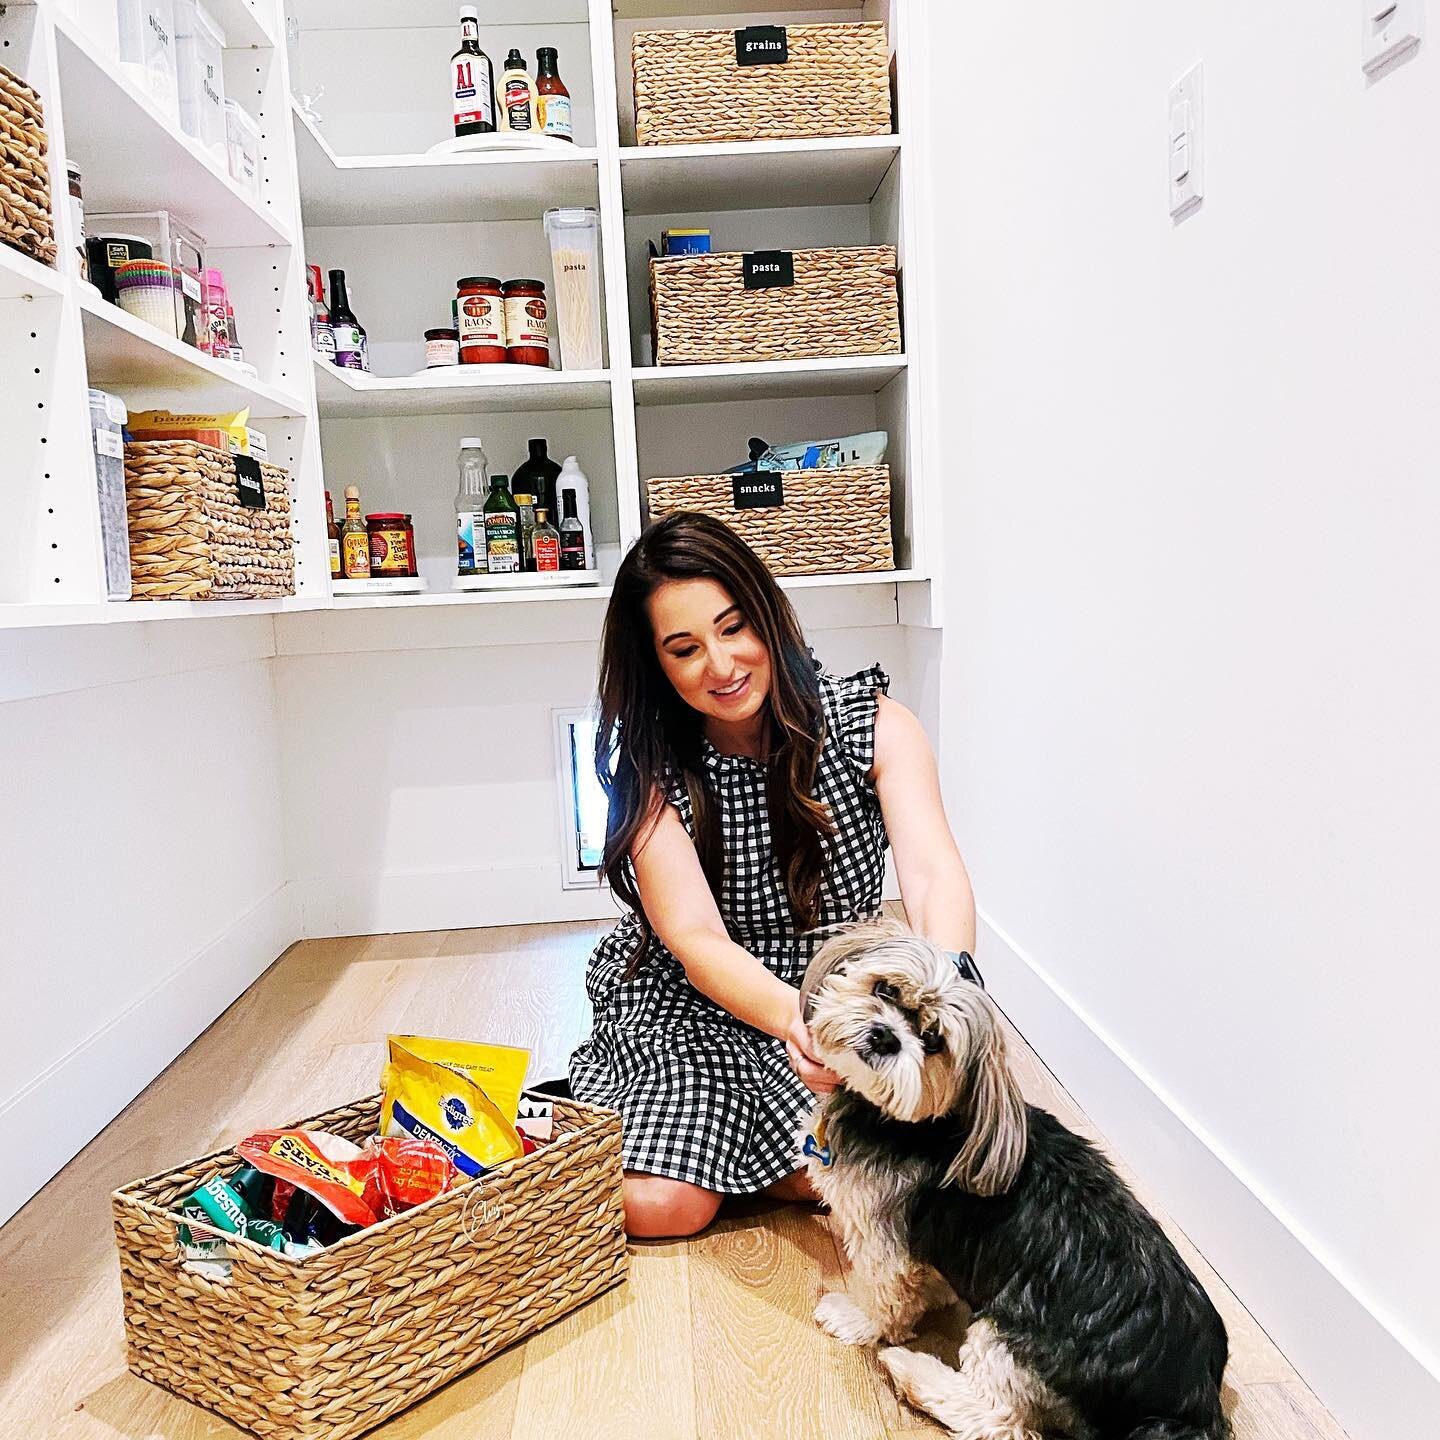 Doesn&rsquo;t this look like a 🐶food ad? 😜

Finished up this pantry this week and I&rsquo;m ABBSOLUTELY loving how it turned out! 

When I saw this house had an amazing @classyclosetsus pantry and I was so excited to organize it. The built-in pantr